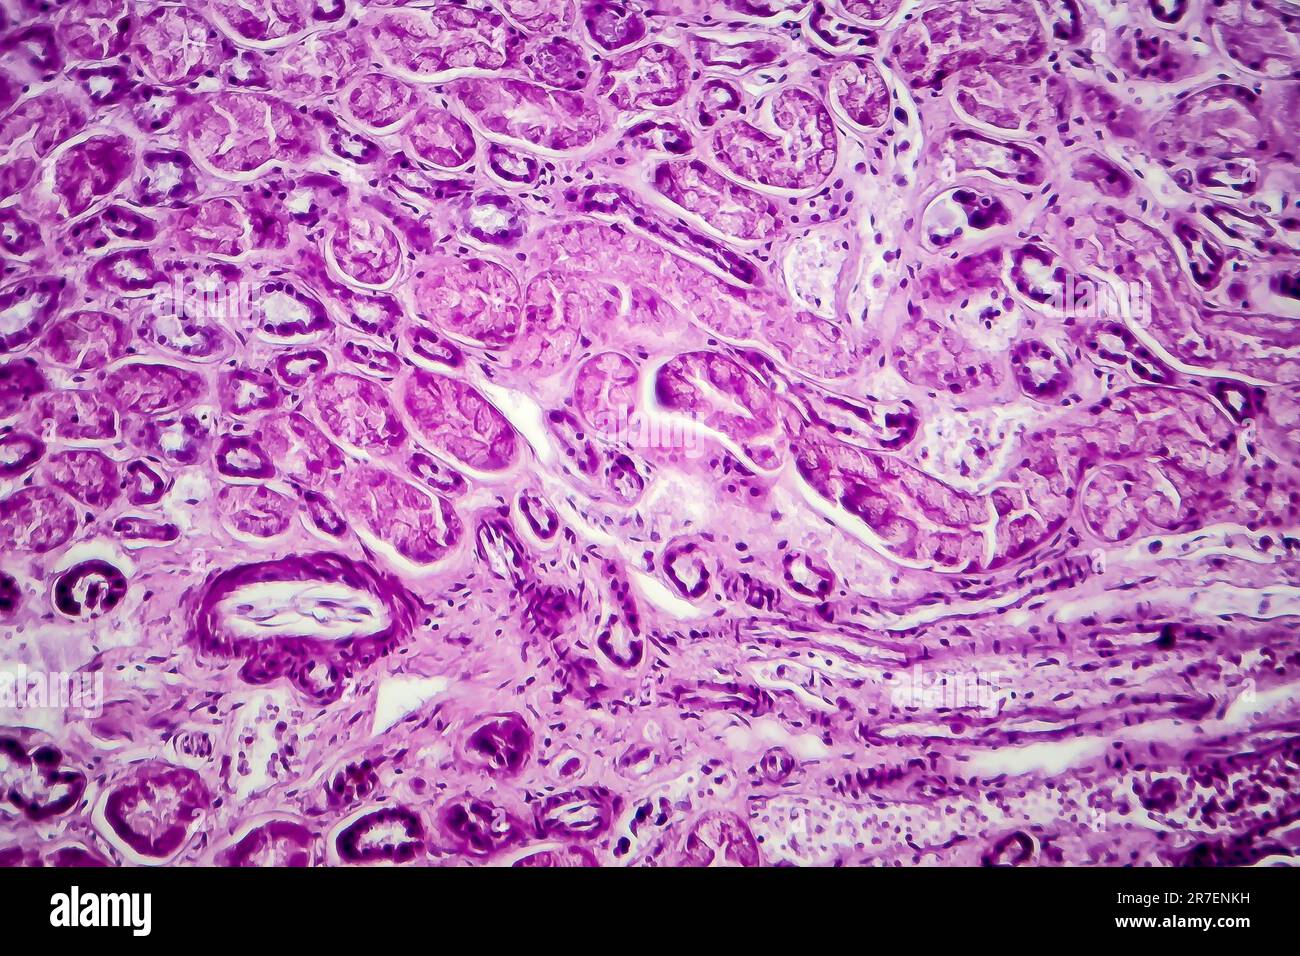 Glomerulonephritis. Light micrograph of tissue from a kidney in a case of diffuse proliferative glomerulonephritis, a form of chronic glomerulonephrit Stock Photo